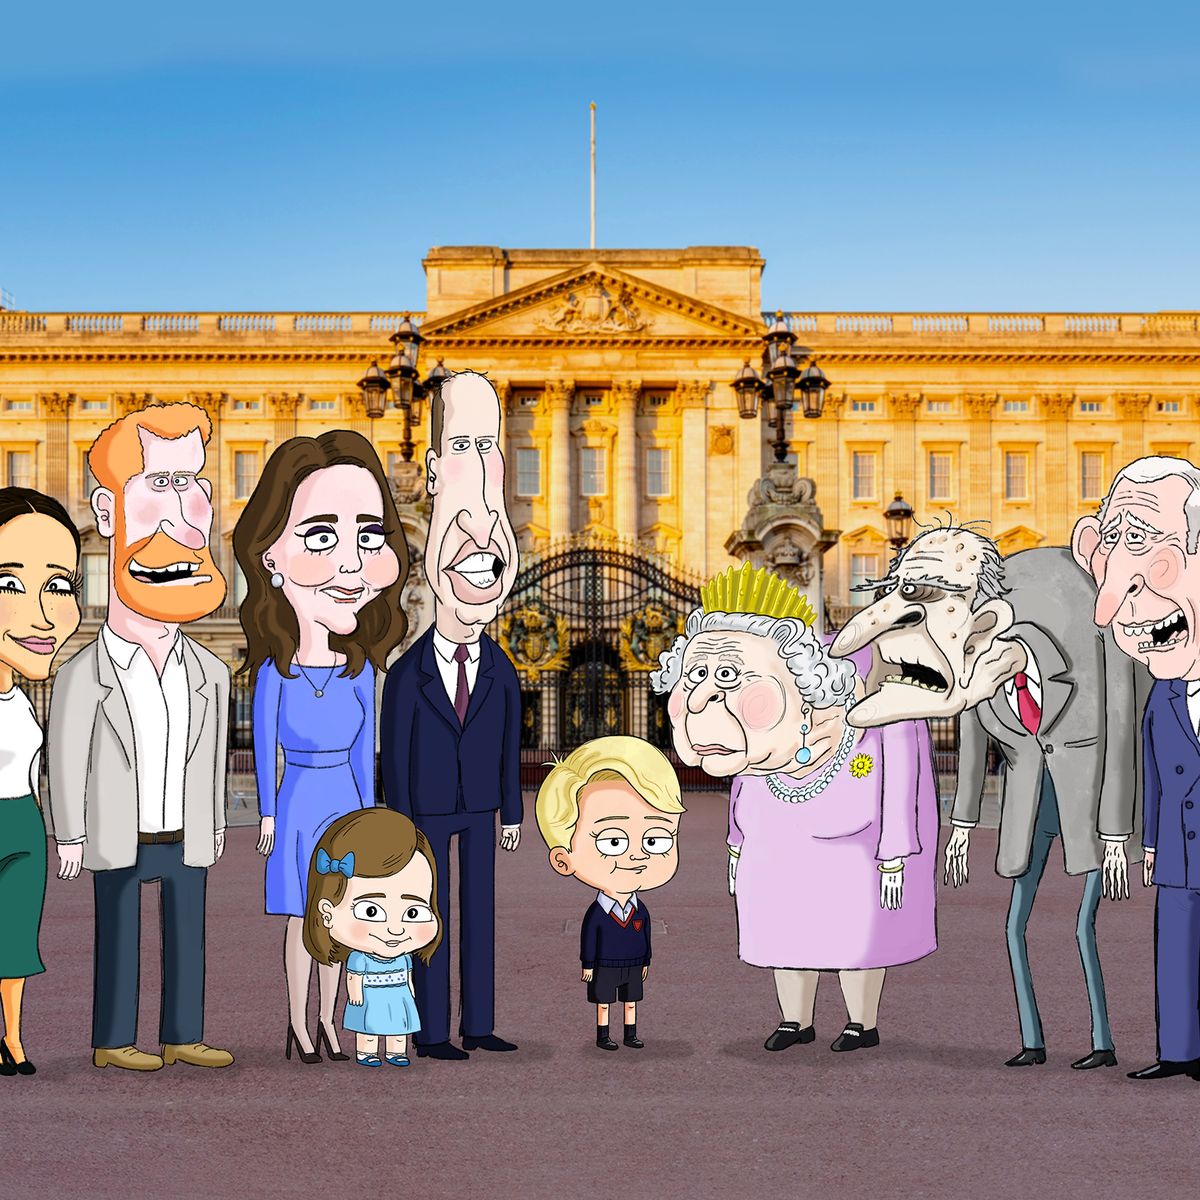 Shauna Black Toon Porn Videos - Gary Janetti's Prince George Parody Is Becoming an Animated Series